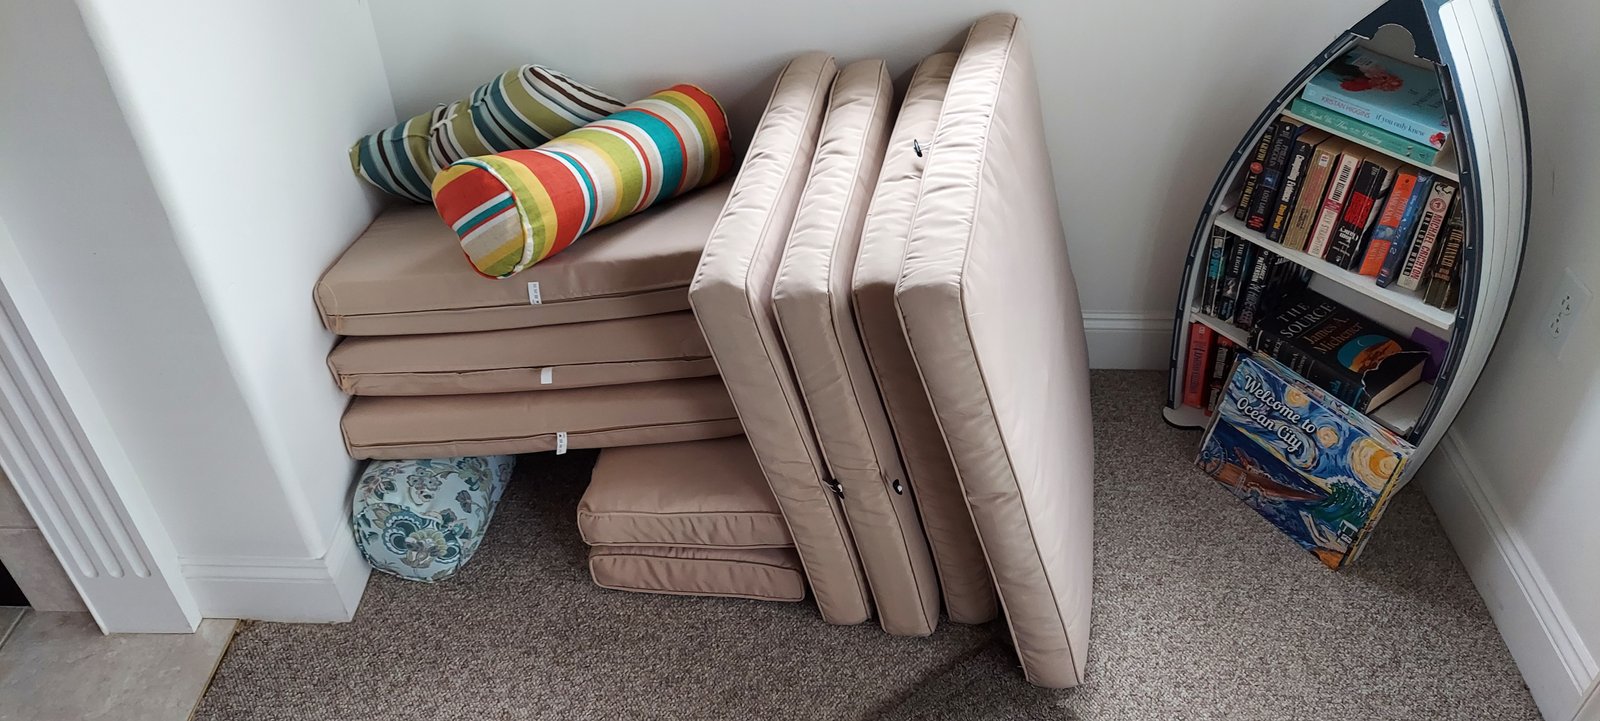 Stacking the cushions